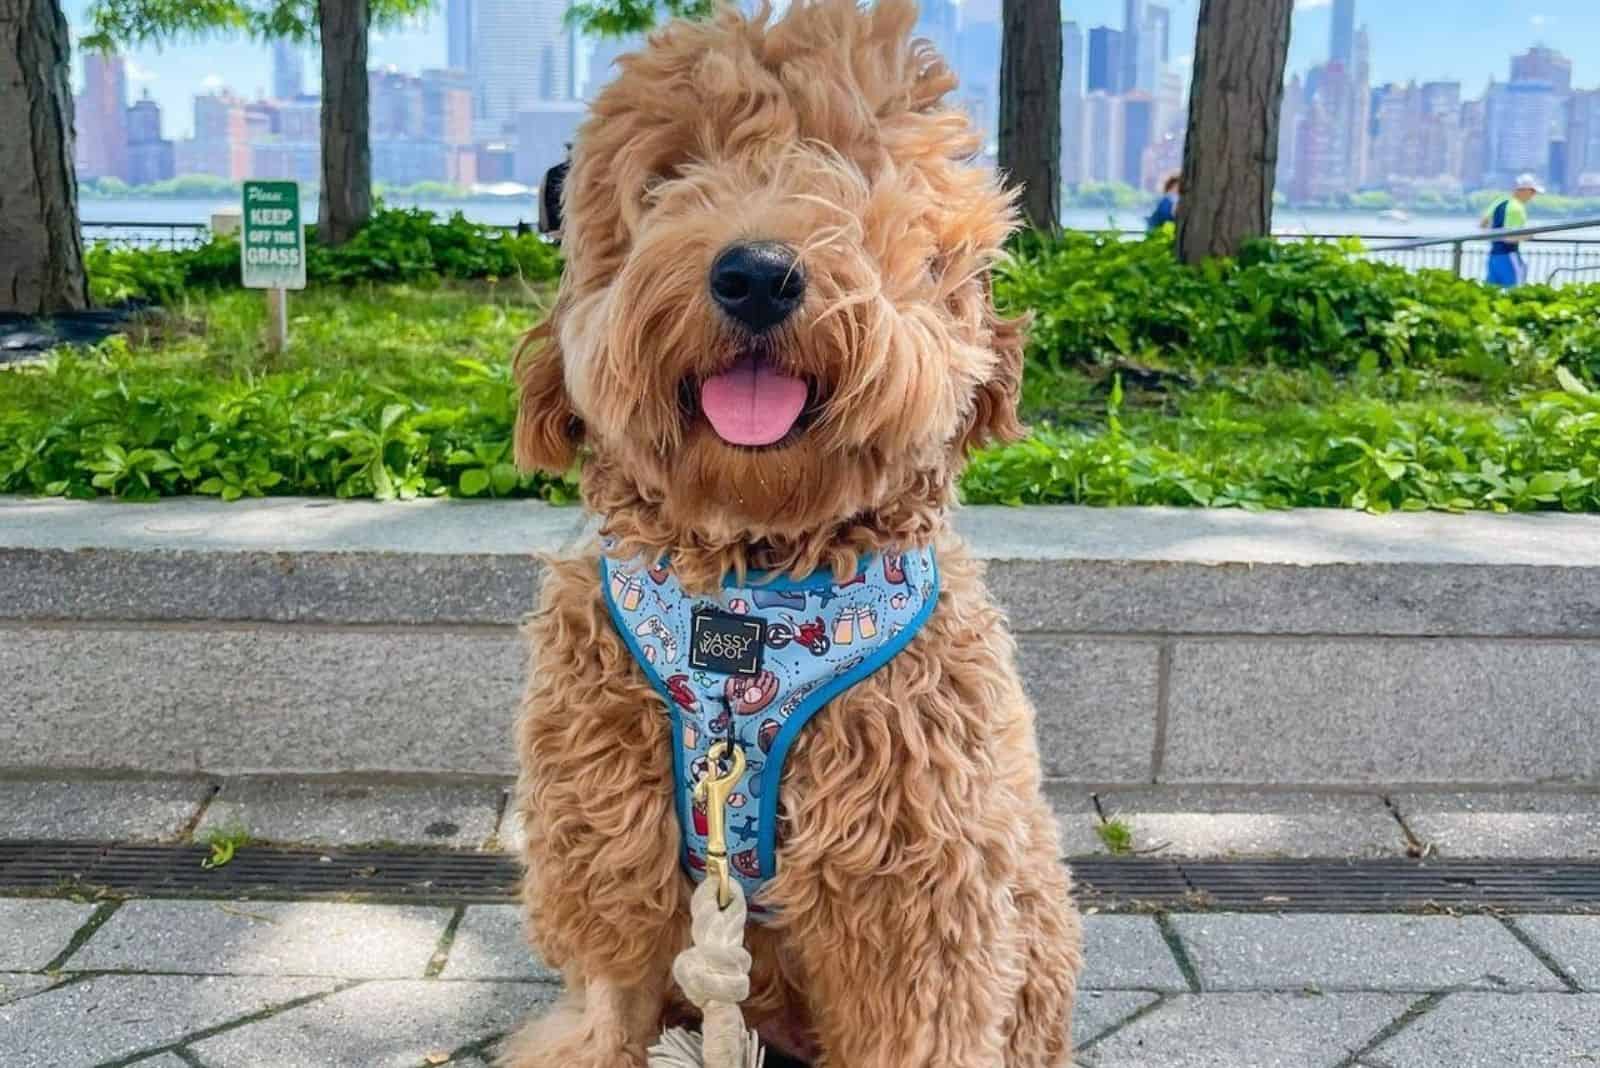 The F1 Goldendoodle: The Pioneer Among The Goldendoodles